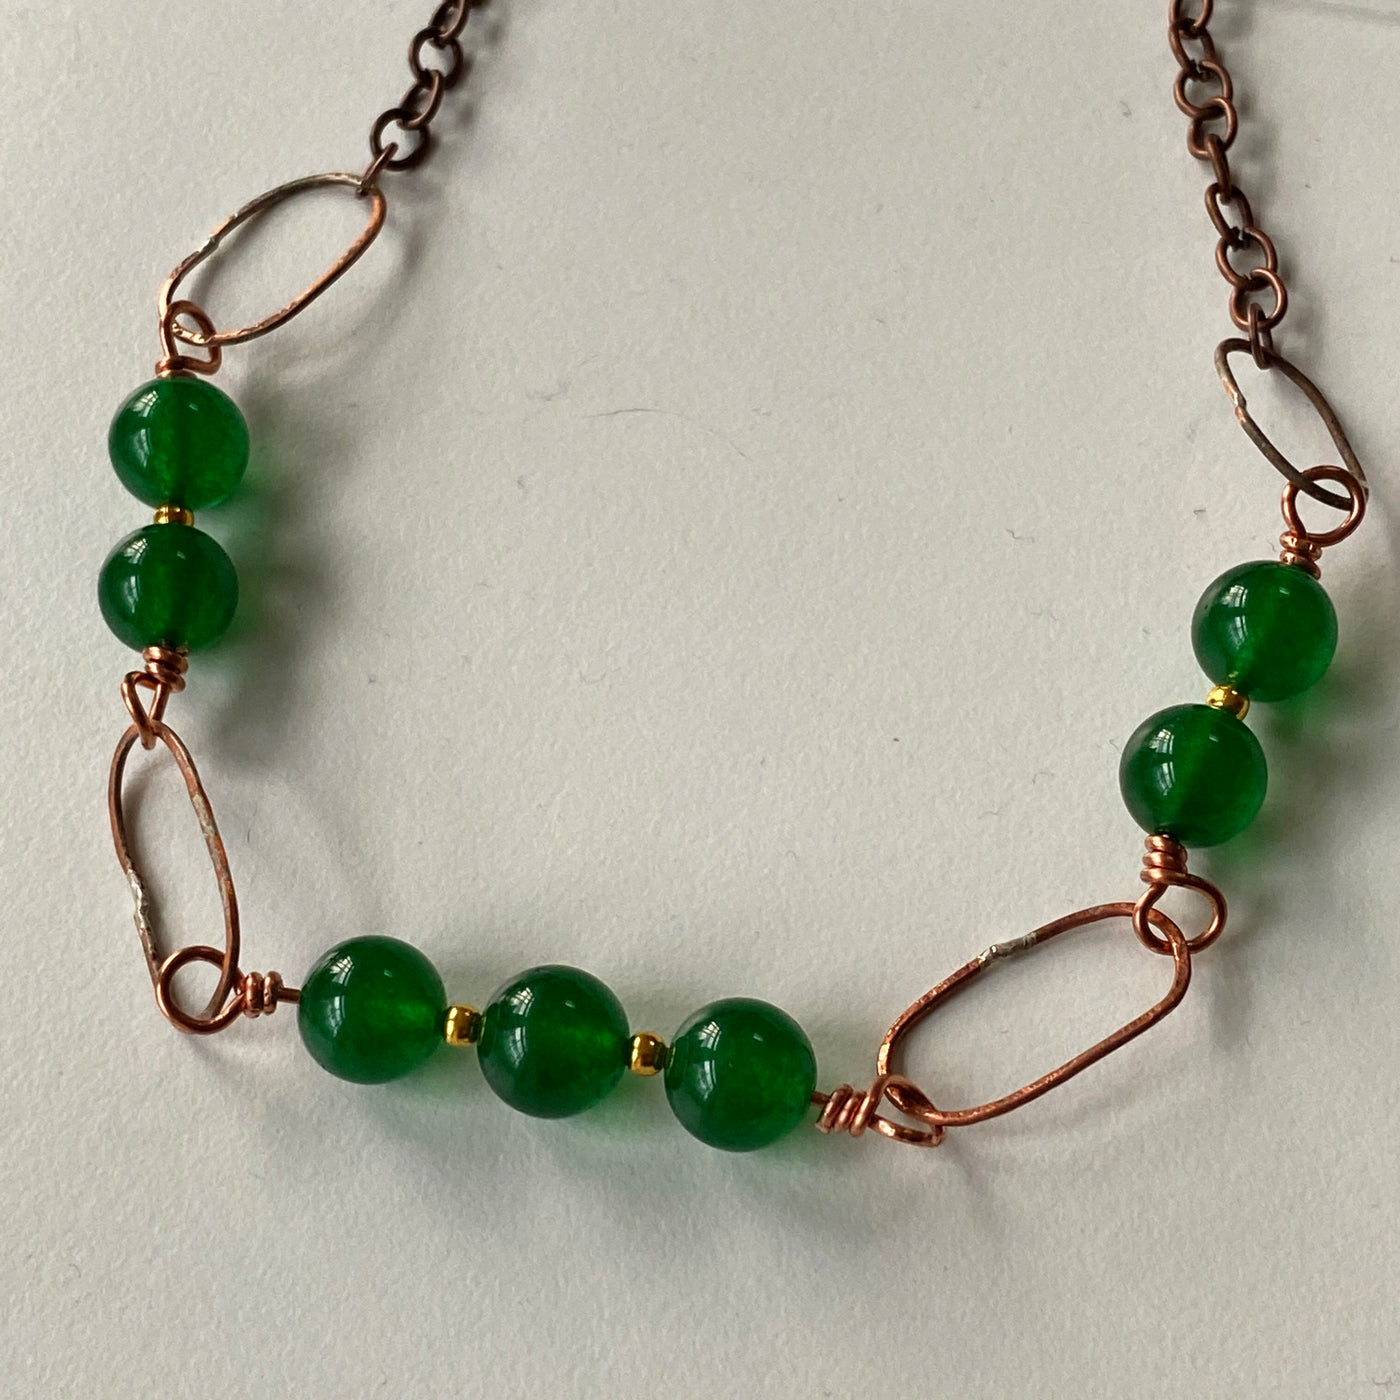 Green calcedony and wire on chain necklace. Lines collection.